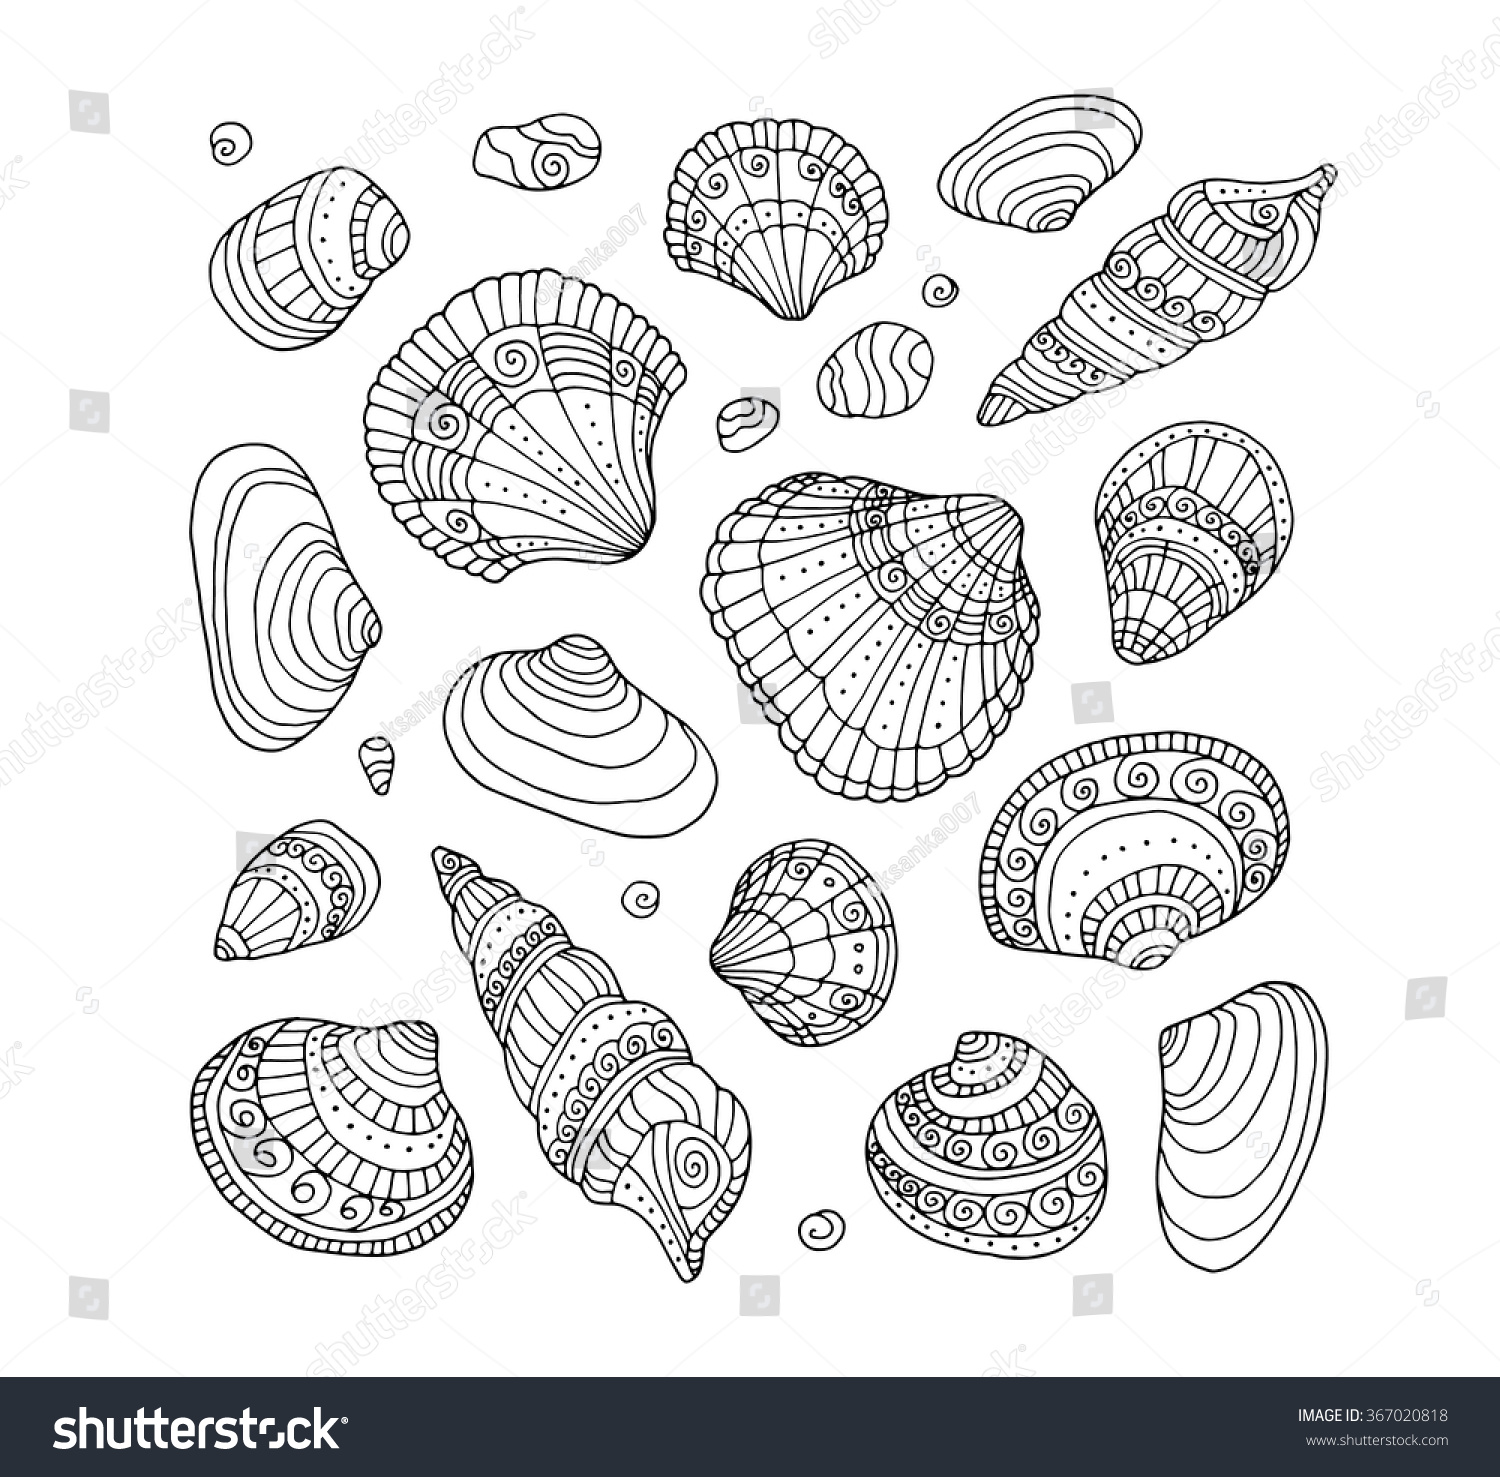 Seashell set collection Vector illustration Zentangle Coloring book page for adult Hand